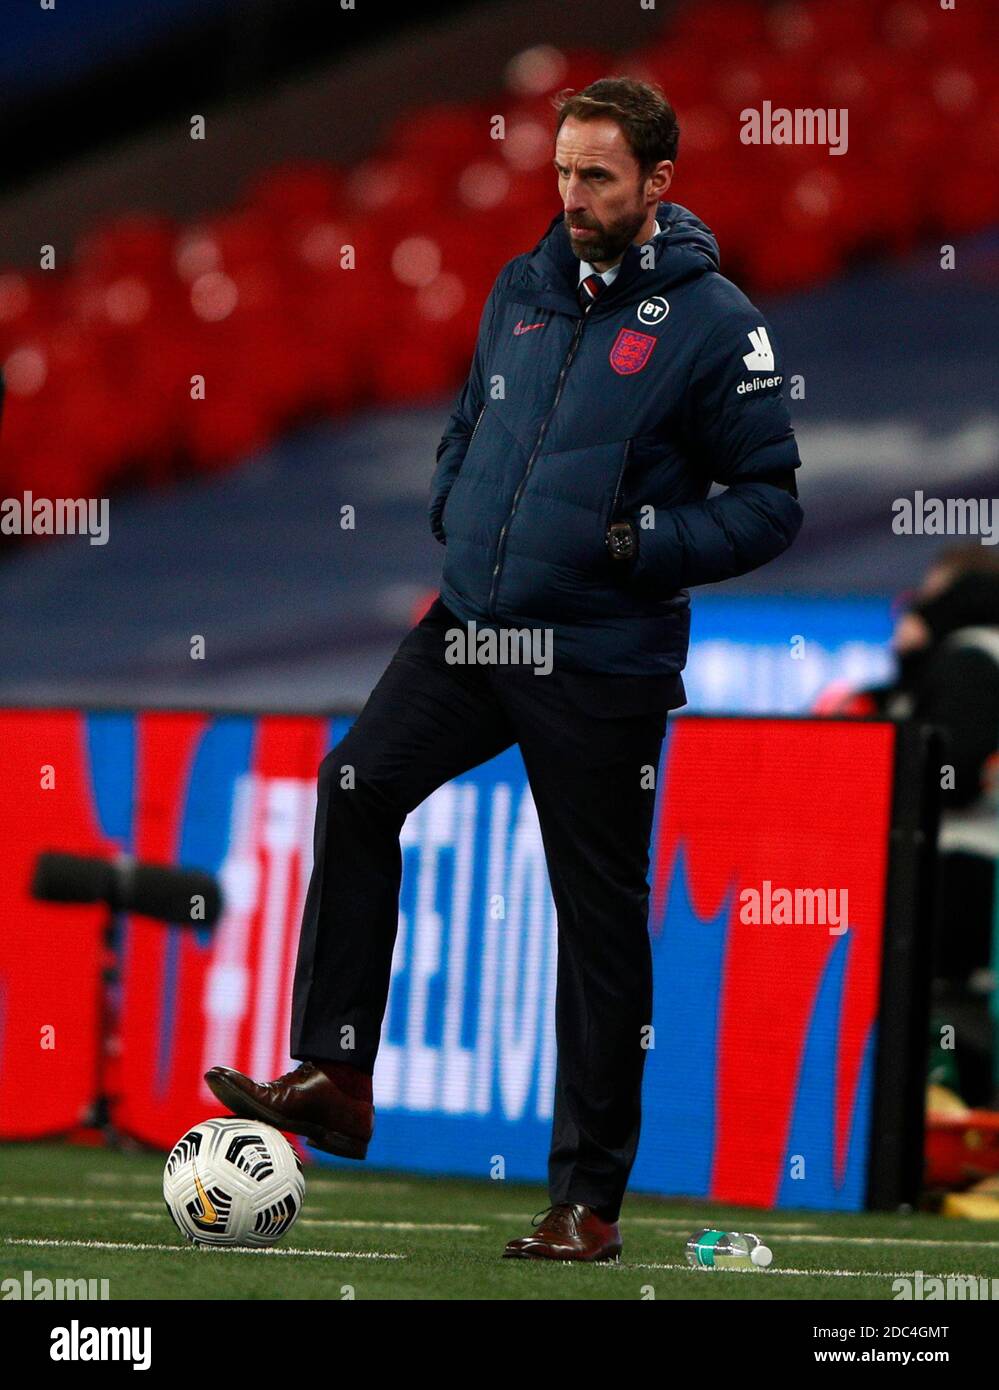 England manager Gareth Southgate on the touchline during the UEFA Nations League Group A2 match at Wembley Stadium, London. Stock Photo